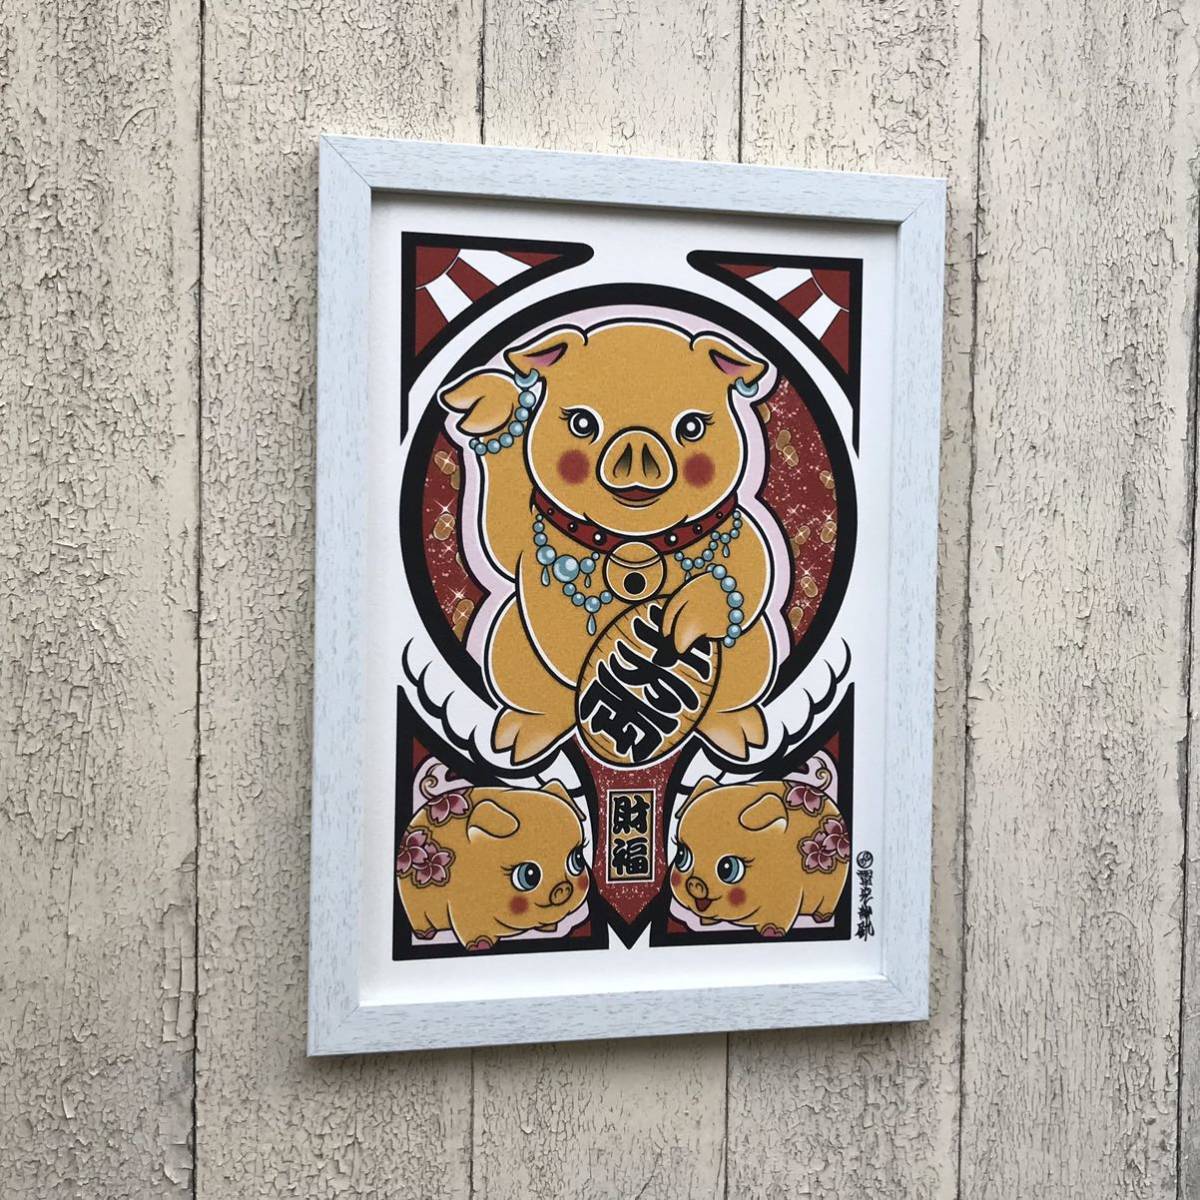  tail 9 better fortune illustration fortune . up gold color .. pig .. rise . luck fortune luck .. item white color frame A4 size frame attaching art frame amount 